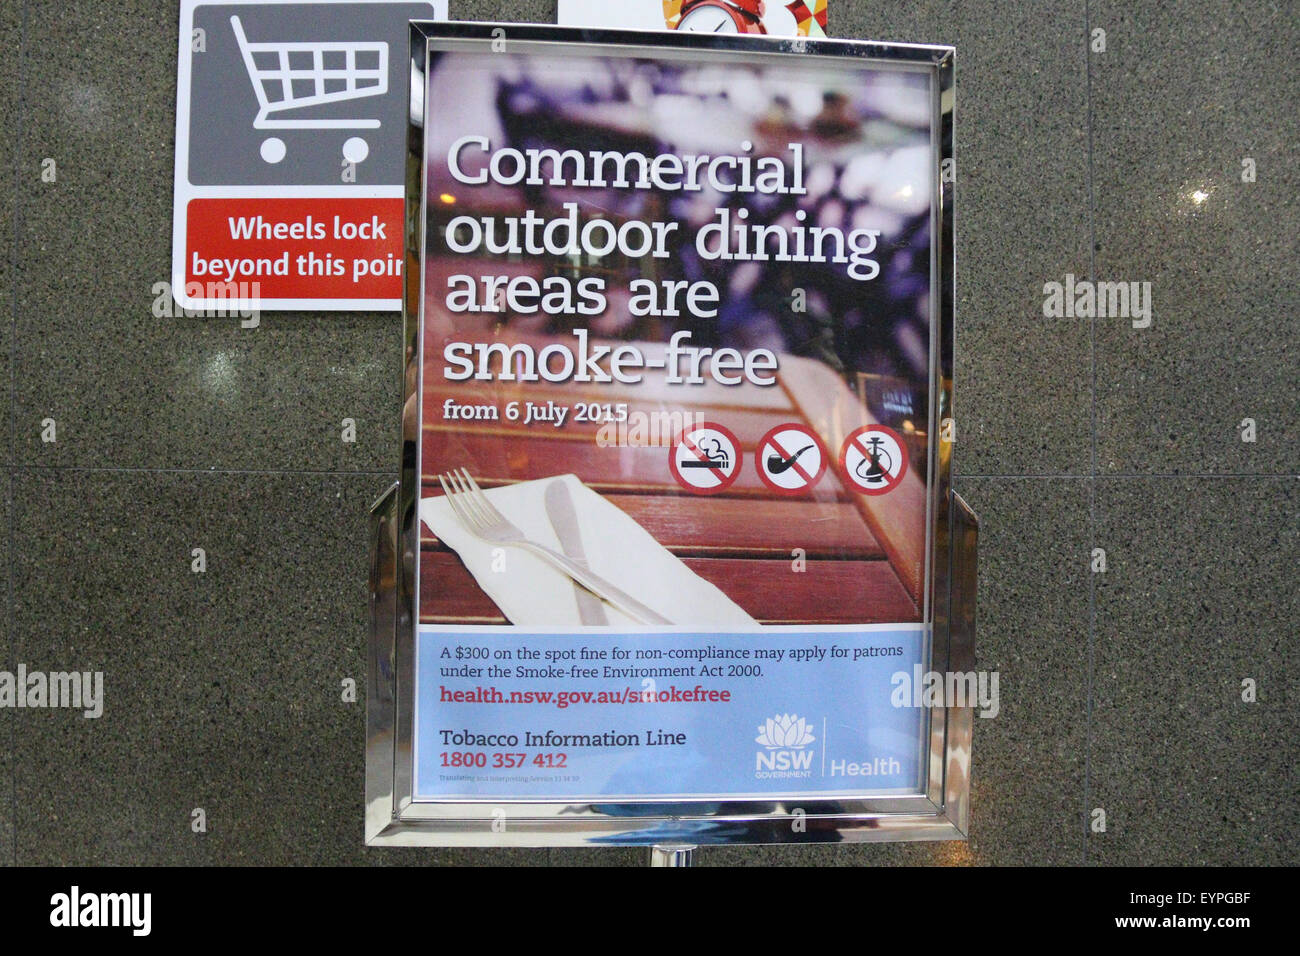 A sign at Broadway Shopping Centre indicating that commercial dining areas are smoke-free from 6 July 2015 in NSW, Australia. Stock Photo